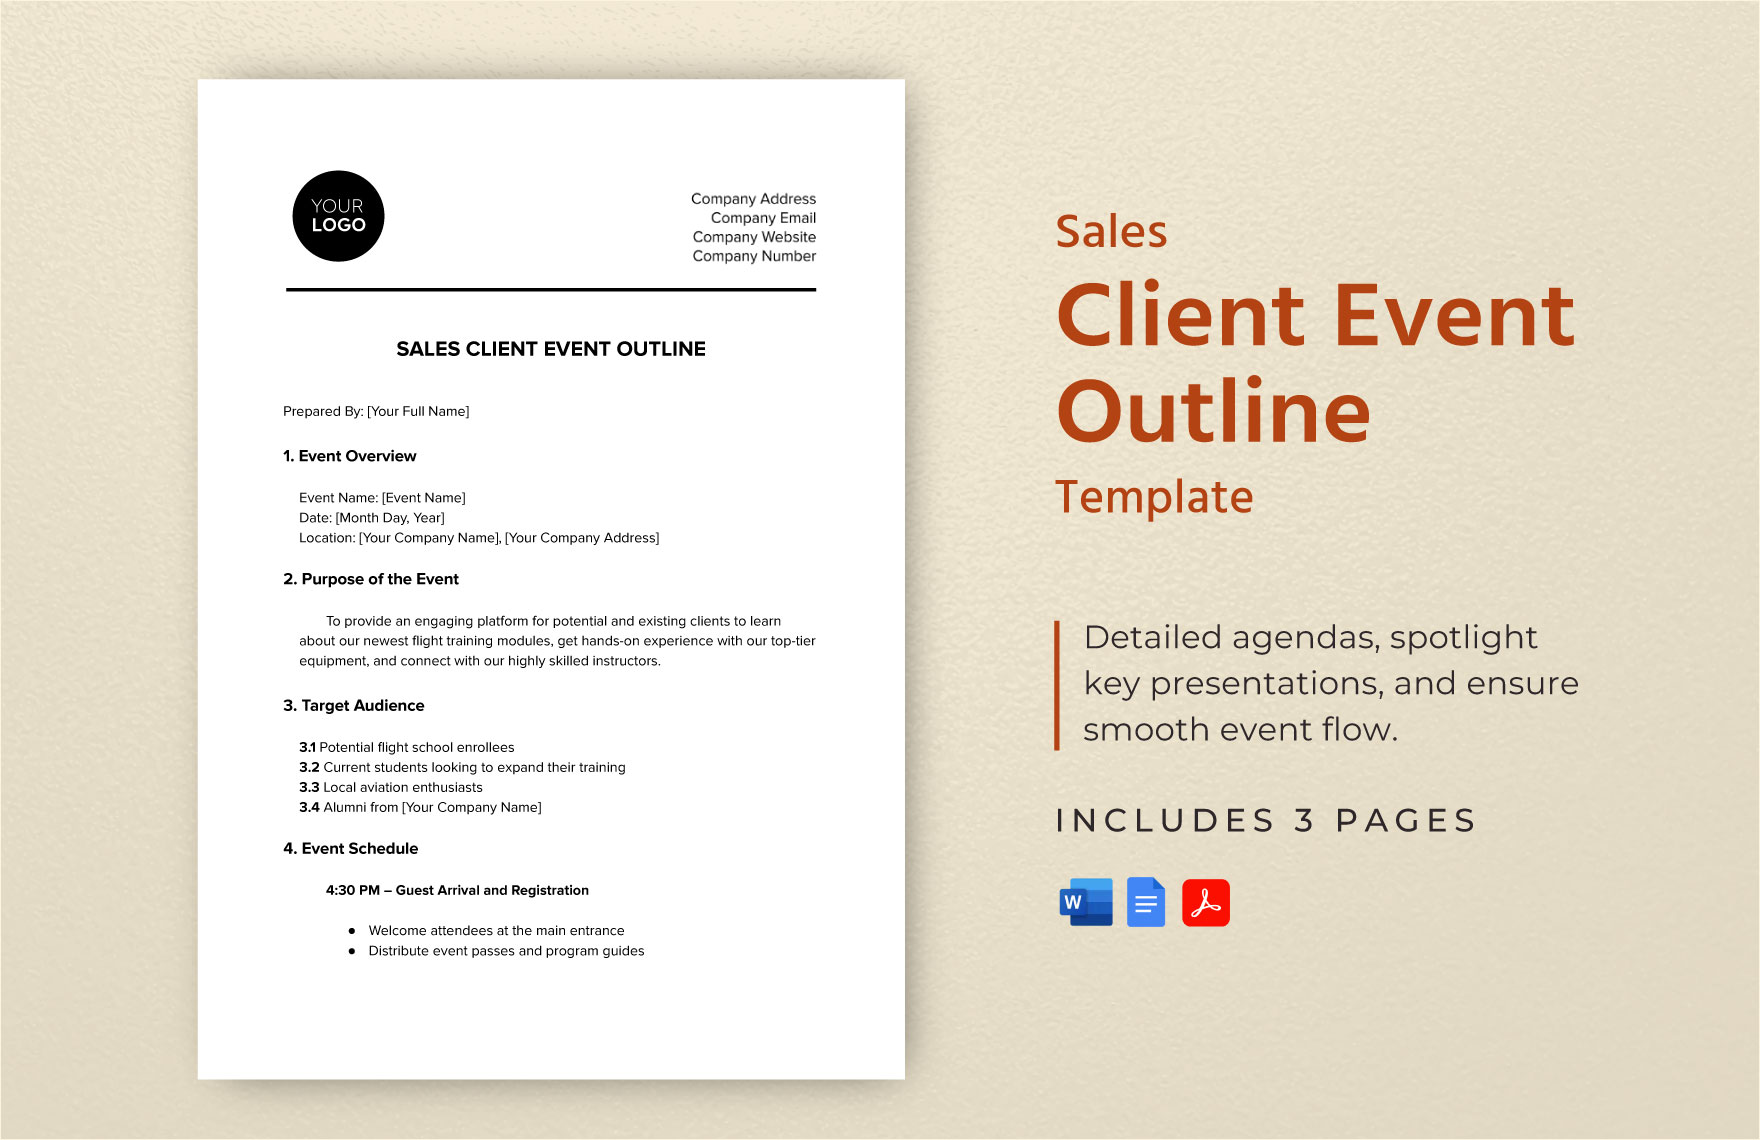 Sales Client Event Outline Template in Word, Google Docs, PDF